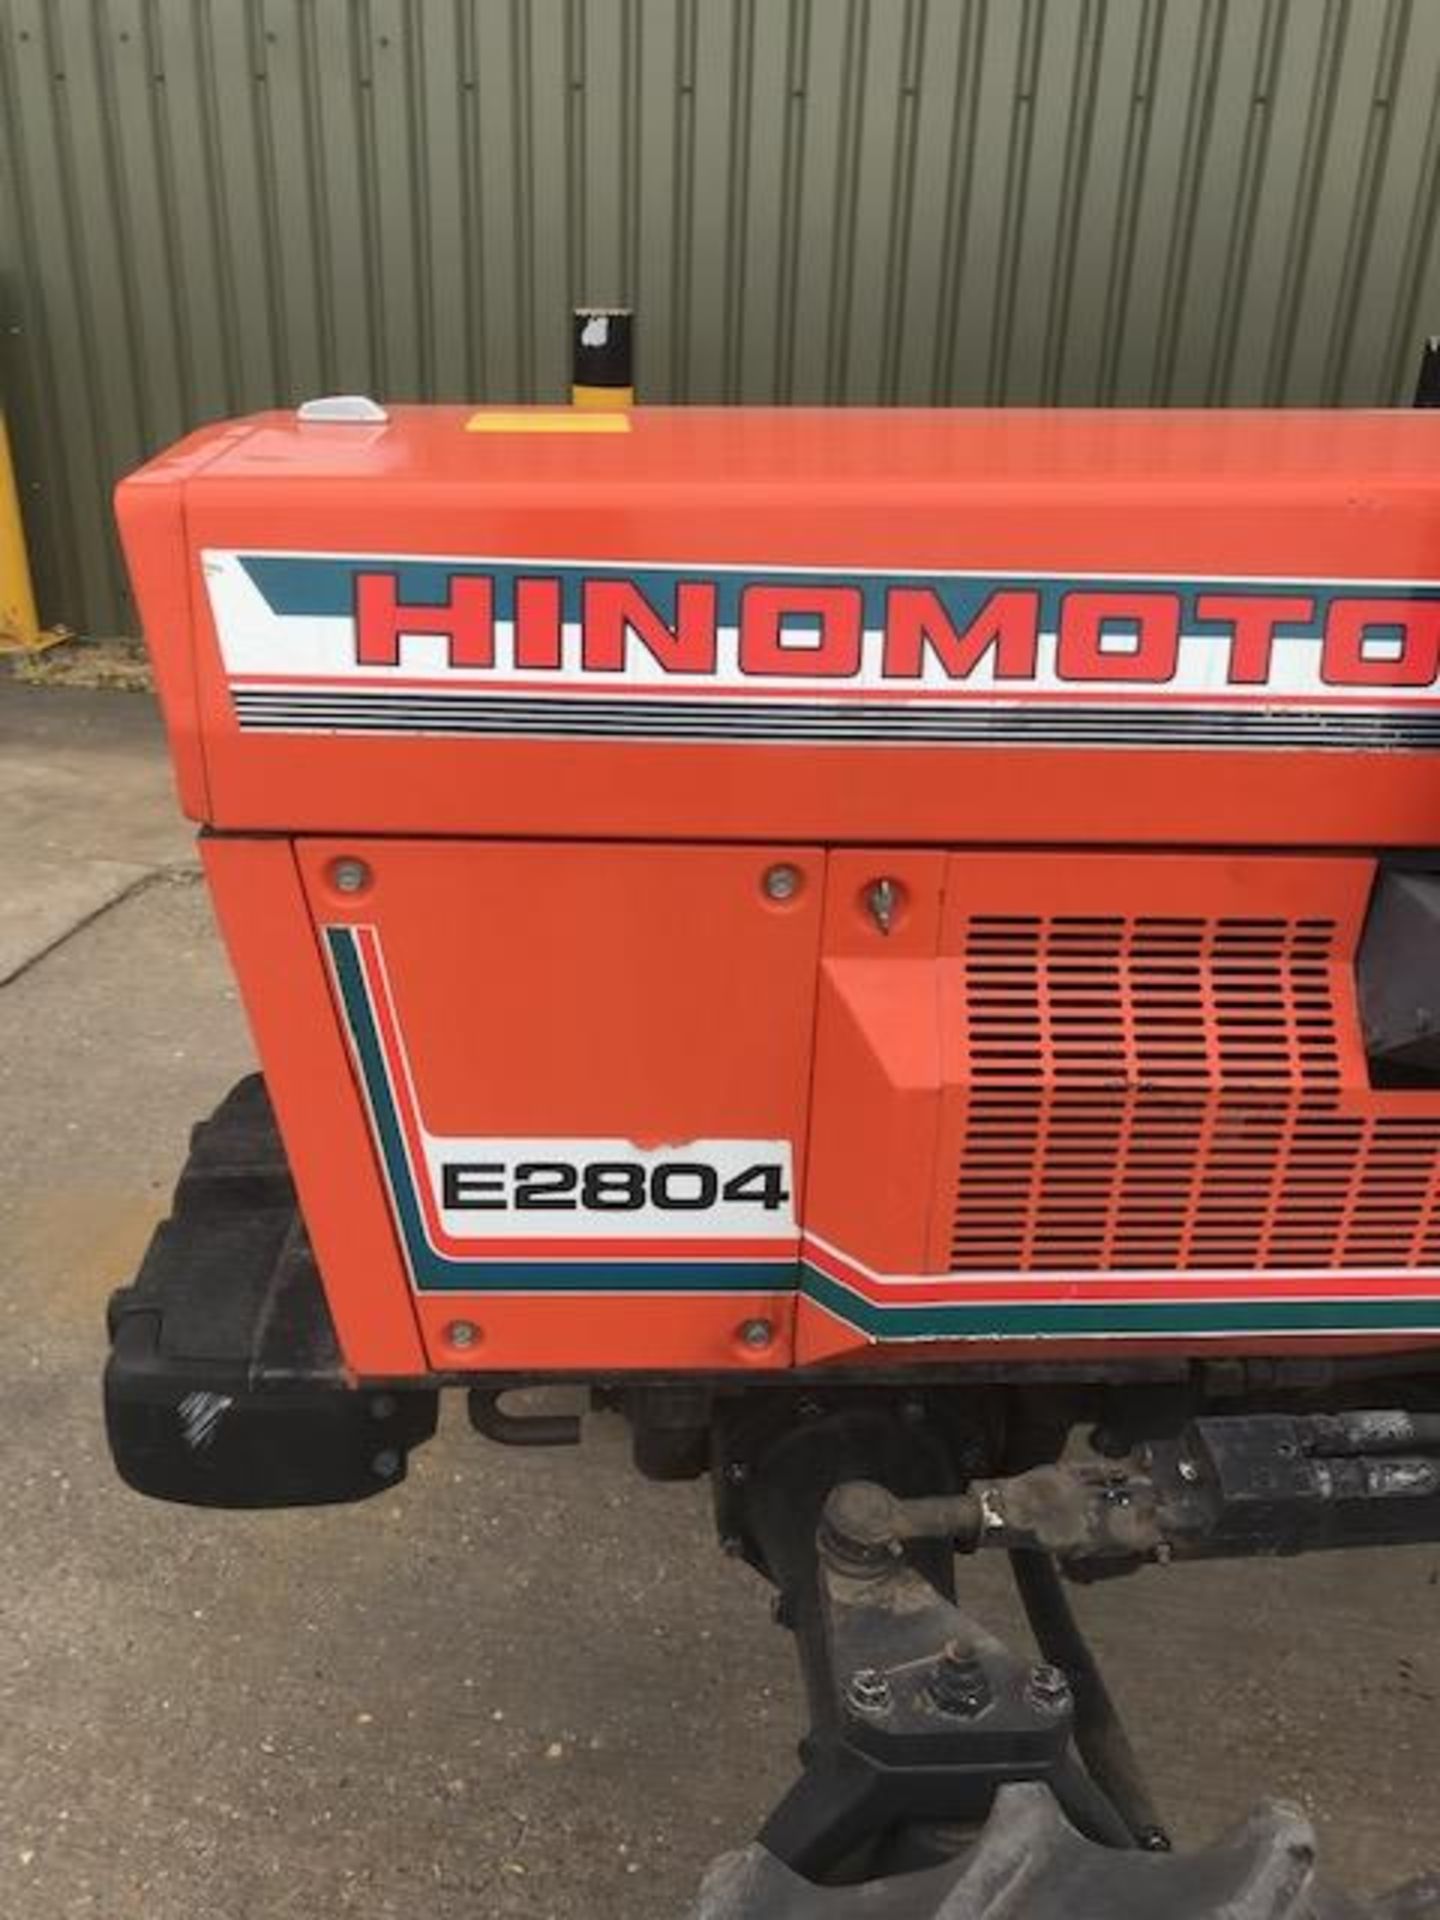 HINOMOTO E2804 Compact 4 x 4 Tractor 234 Hours Only with Rotavator - Image 2 of 10